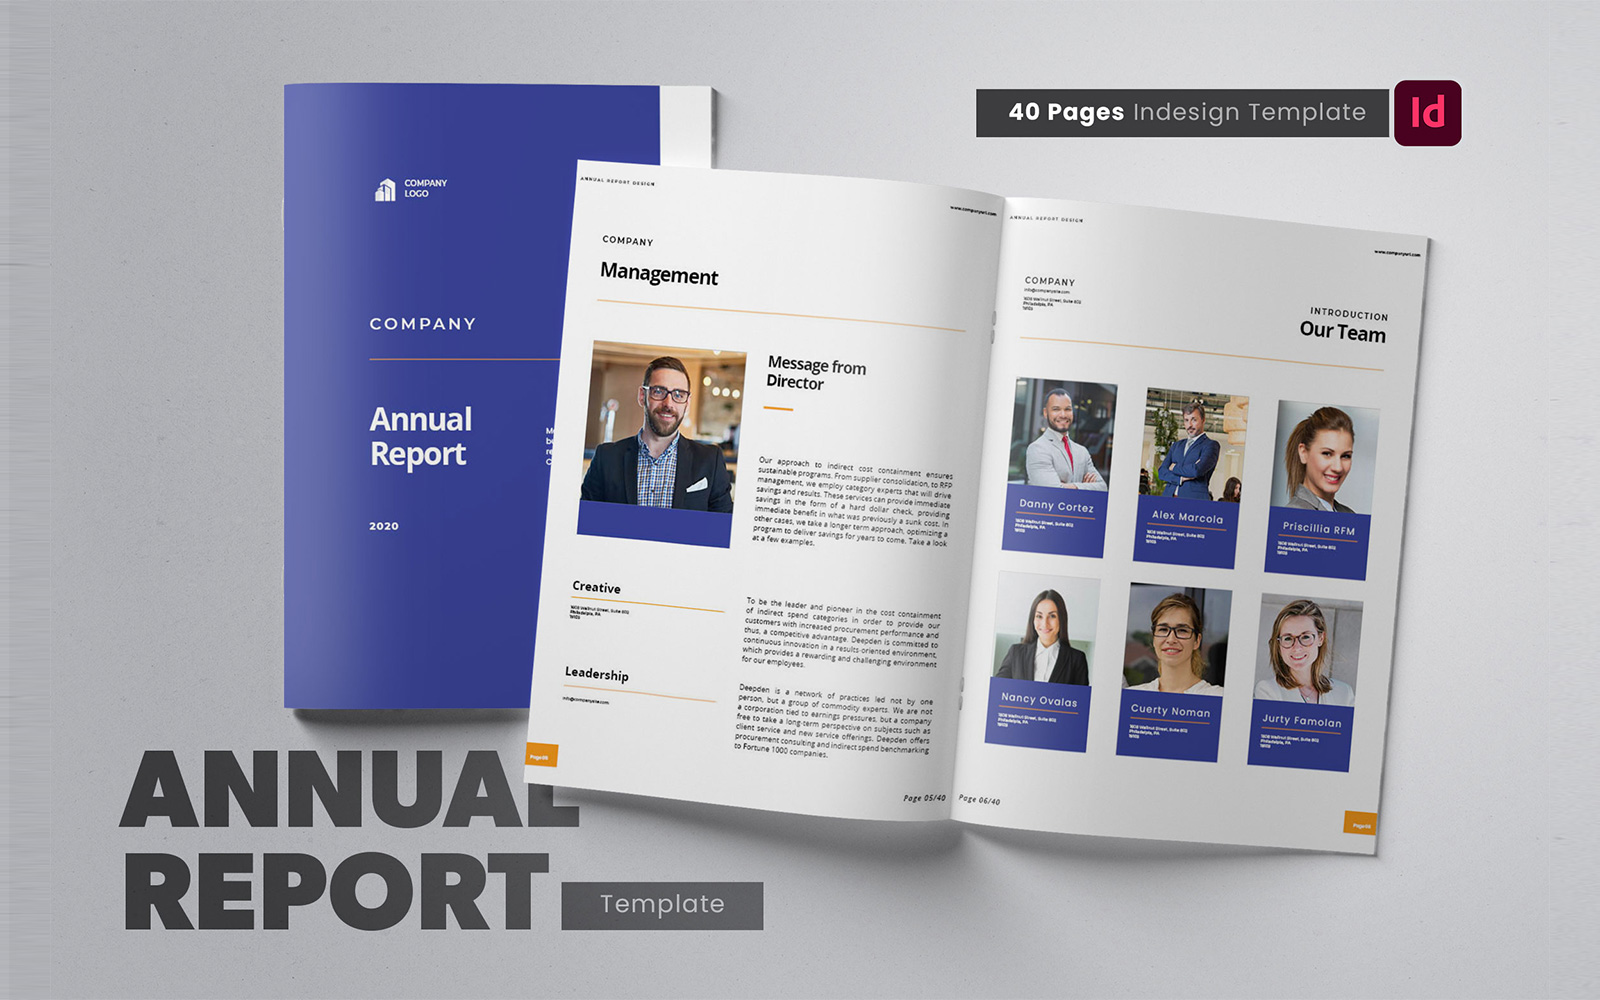 Company Annual Report Indesign Template